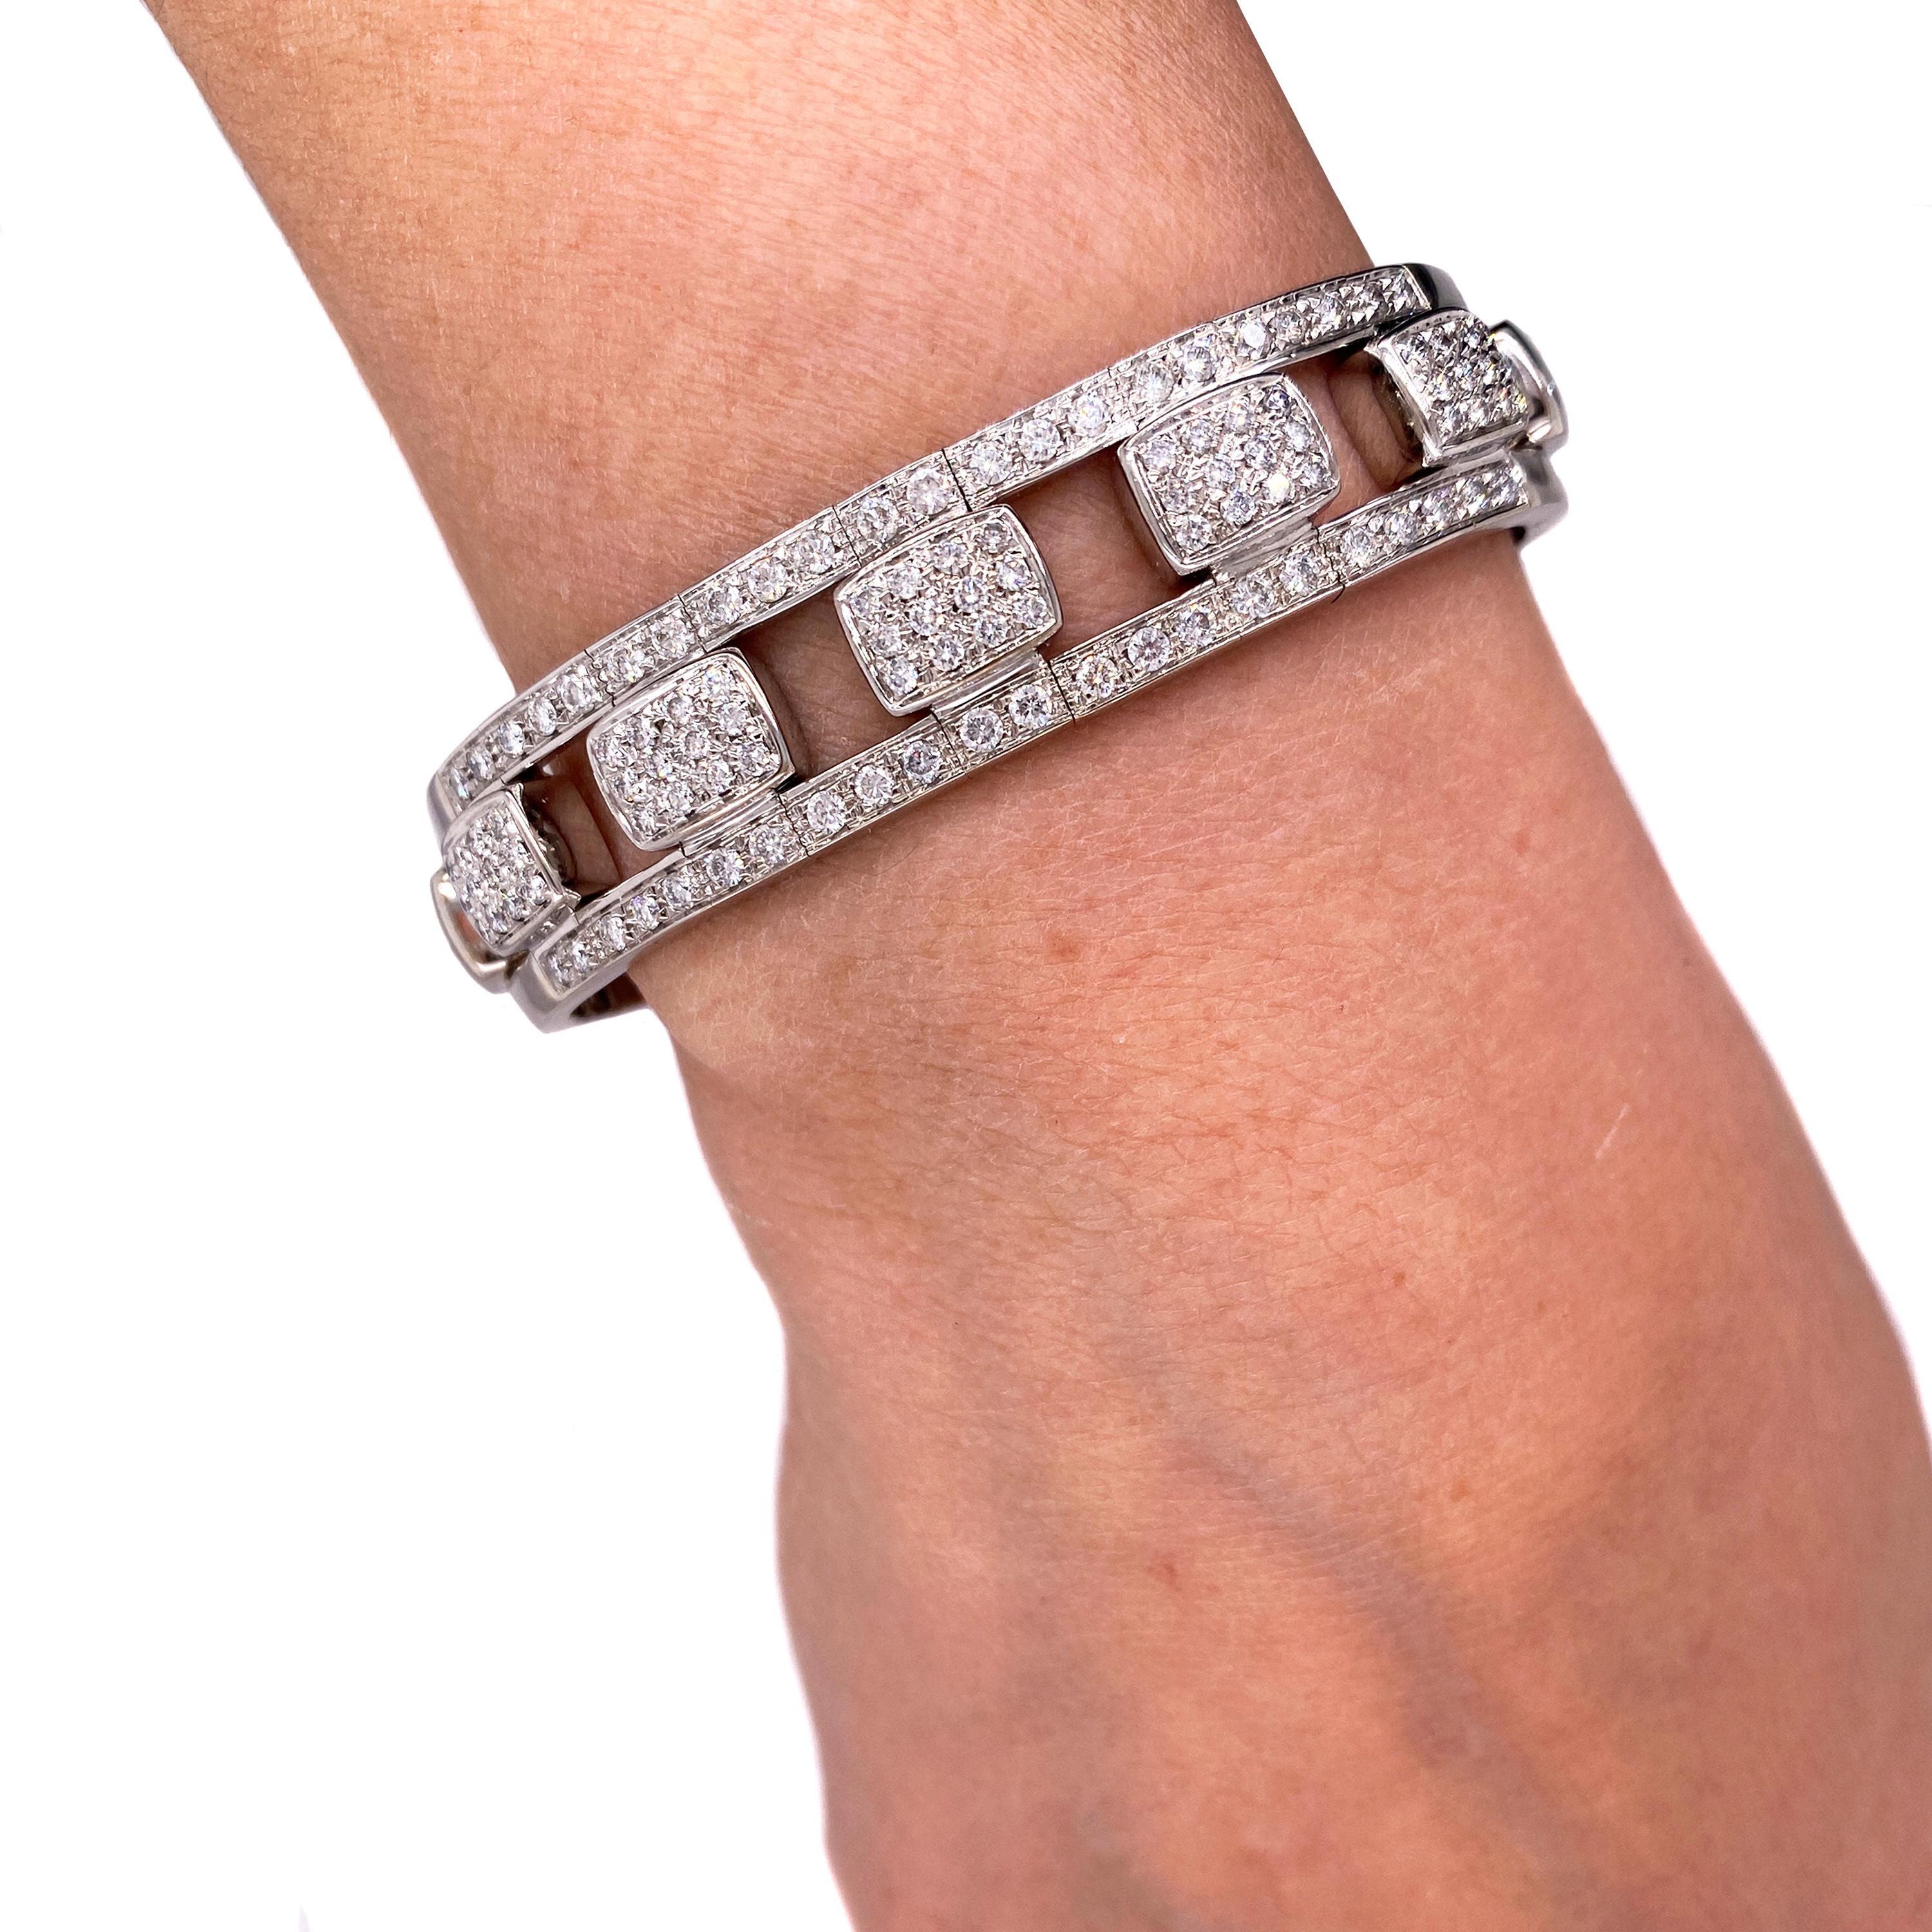 18K White Gold 3 Carats Pavé Set Diamonds Flexible Bangle Bracelet

This flexible bracelet stretches open to wear. There is a slight opening that allows the bangle to open and sit tight when worn.

Apprx. 3 carat G color, VS clarity diamonds total